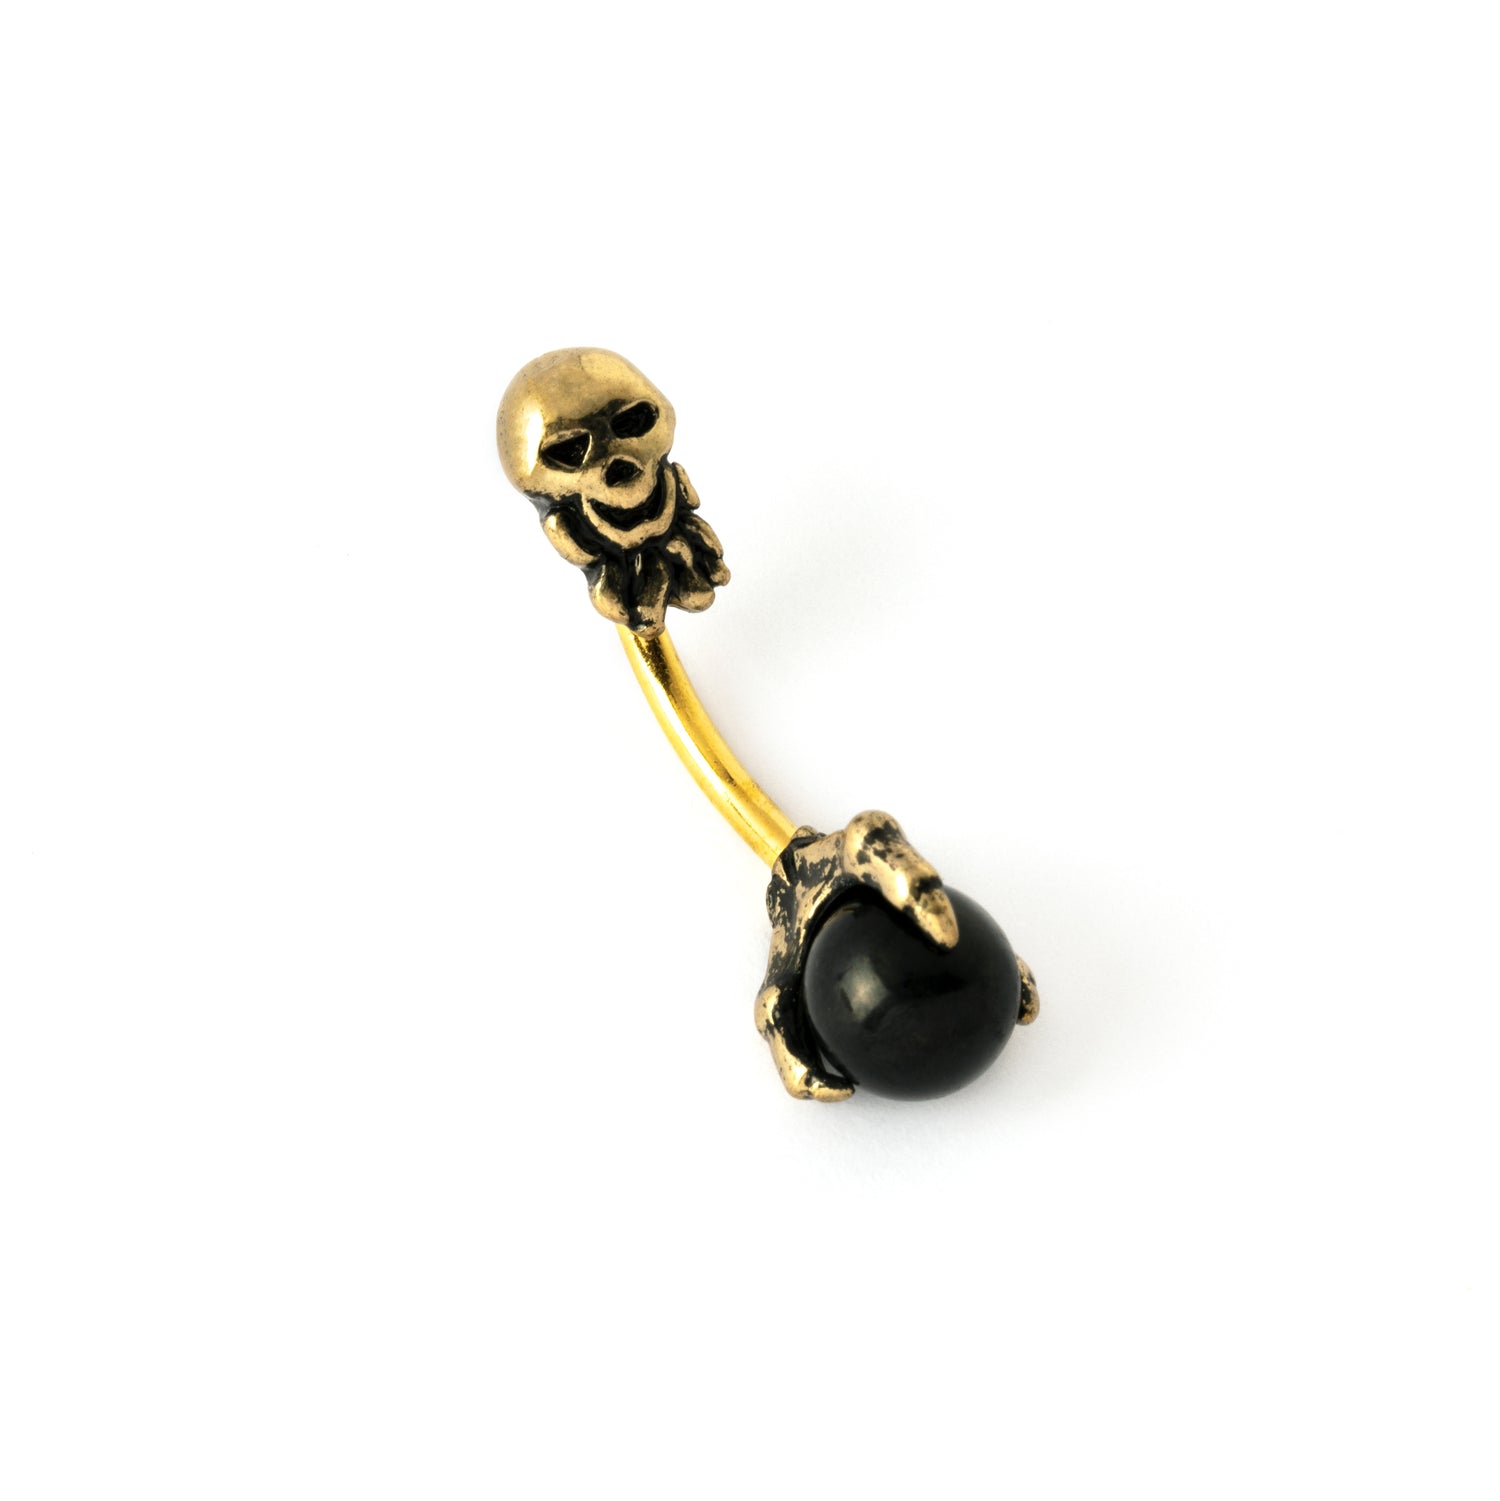 Golden-skull-belly-bar-with-claw1